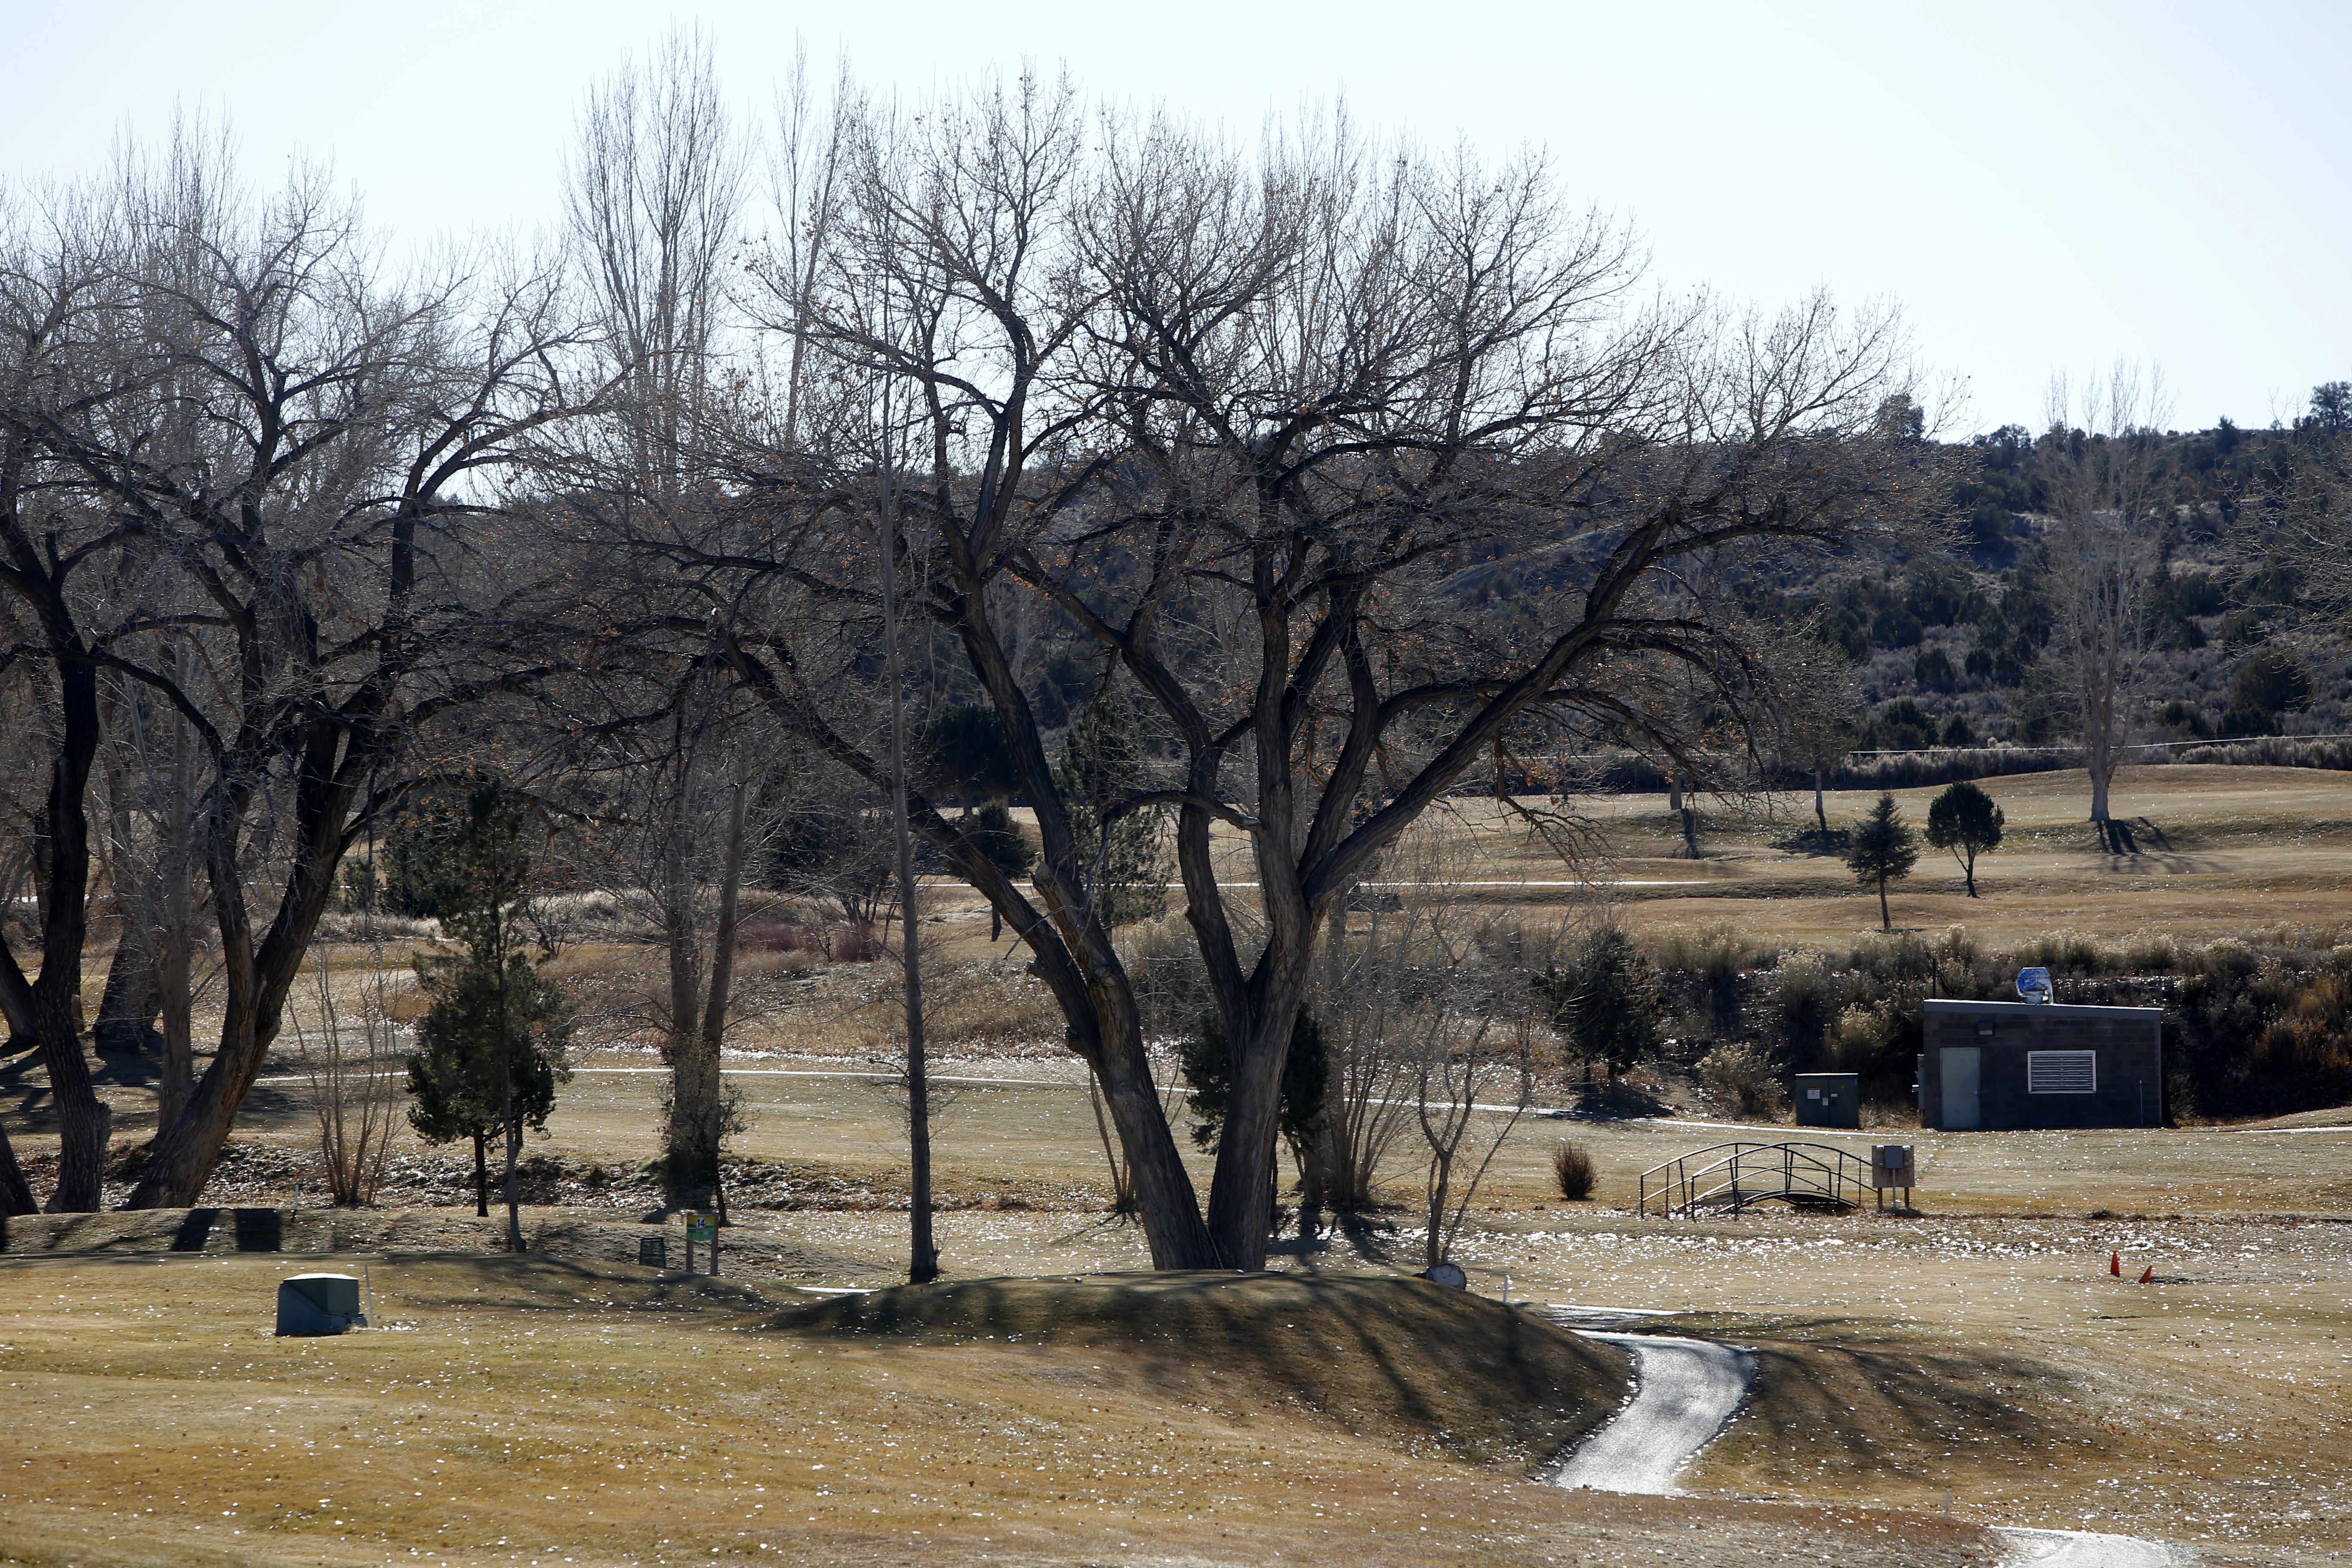 The Aztec City Commission will discuss the future of the Aztec Municipal Golf Course.